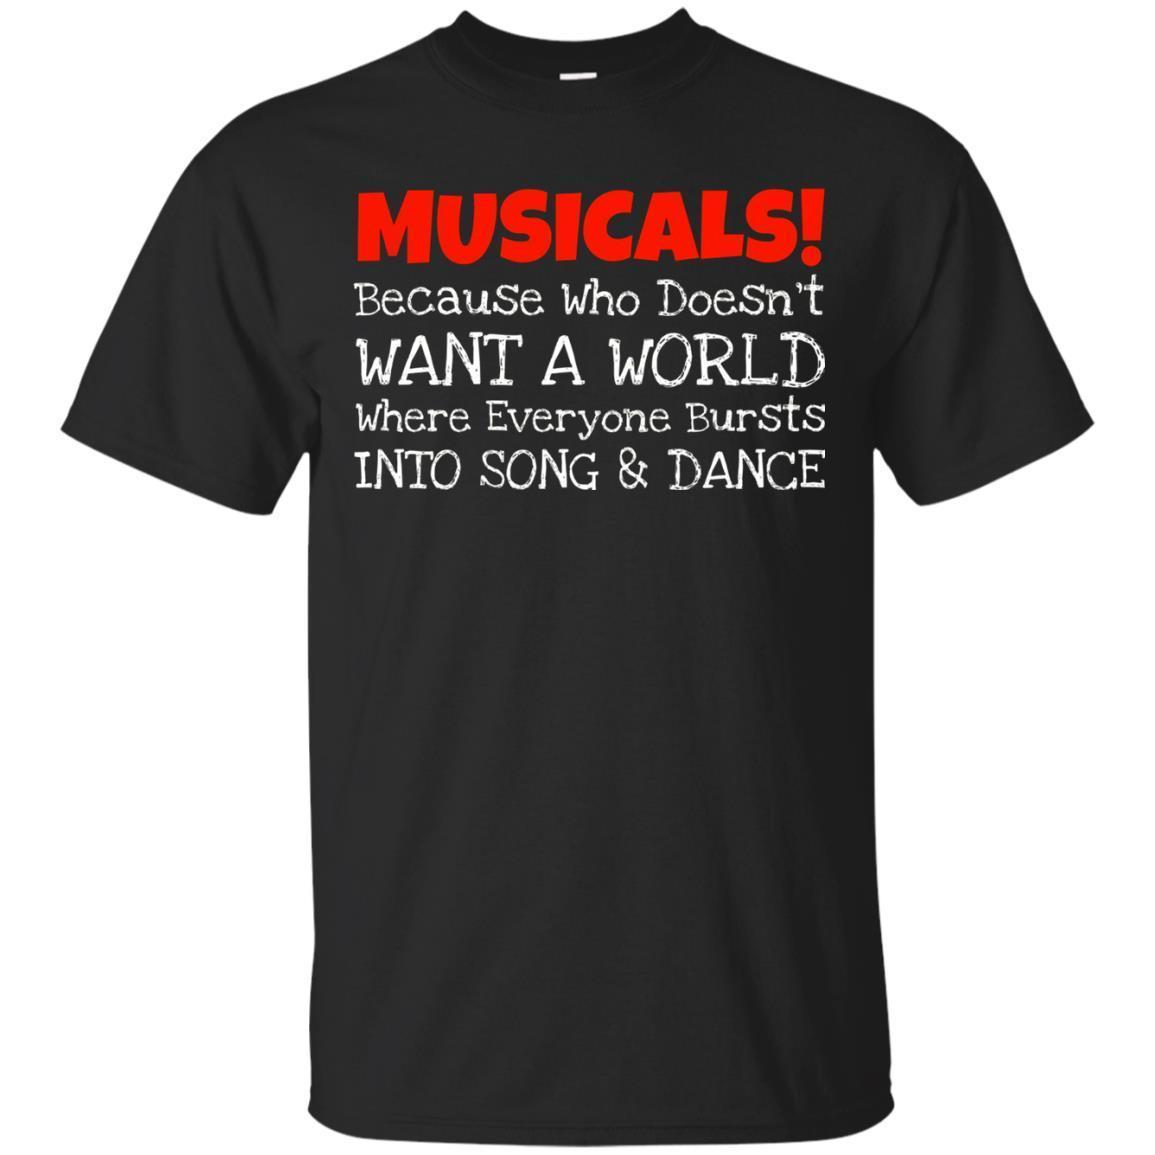 Musicals Burst Into Song And Dance Funny T-shirt T-shirt - Amyna